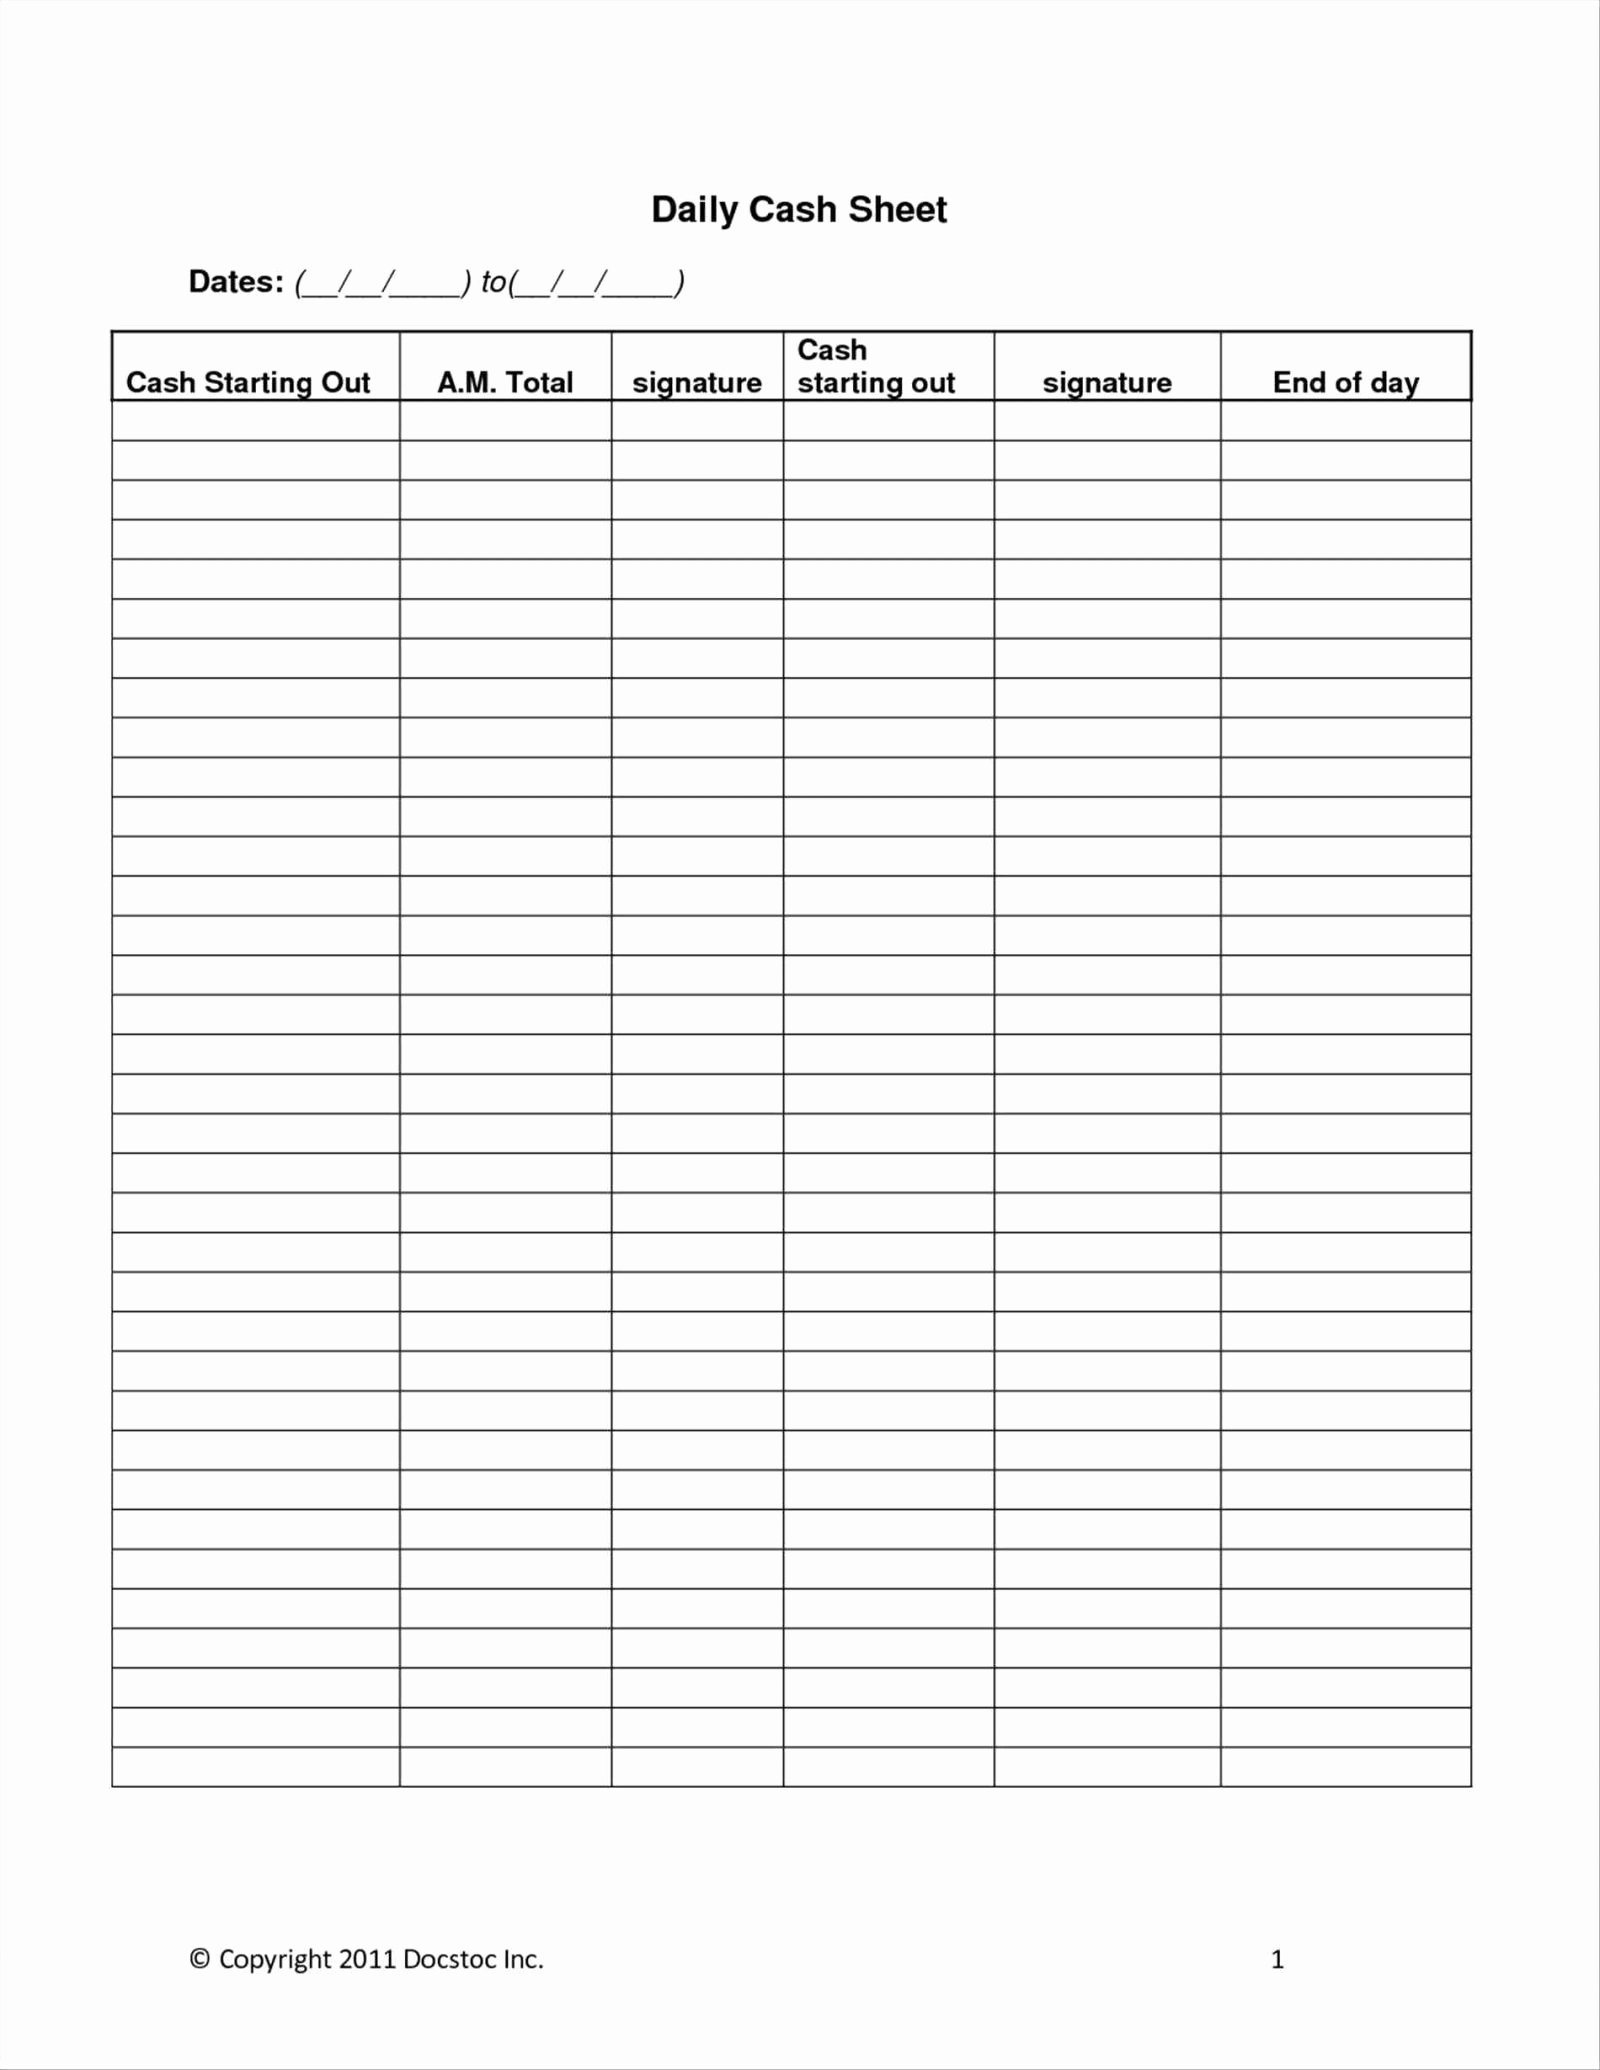 Daily Cash Sheet Template Excel Luxury Project Cash Flow Checklist Transform Resume Review